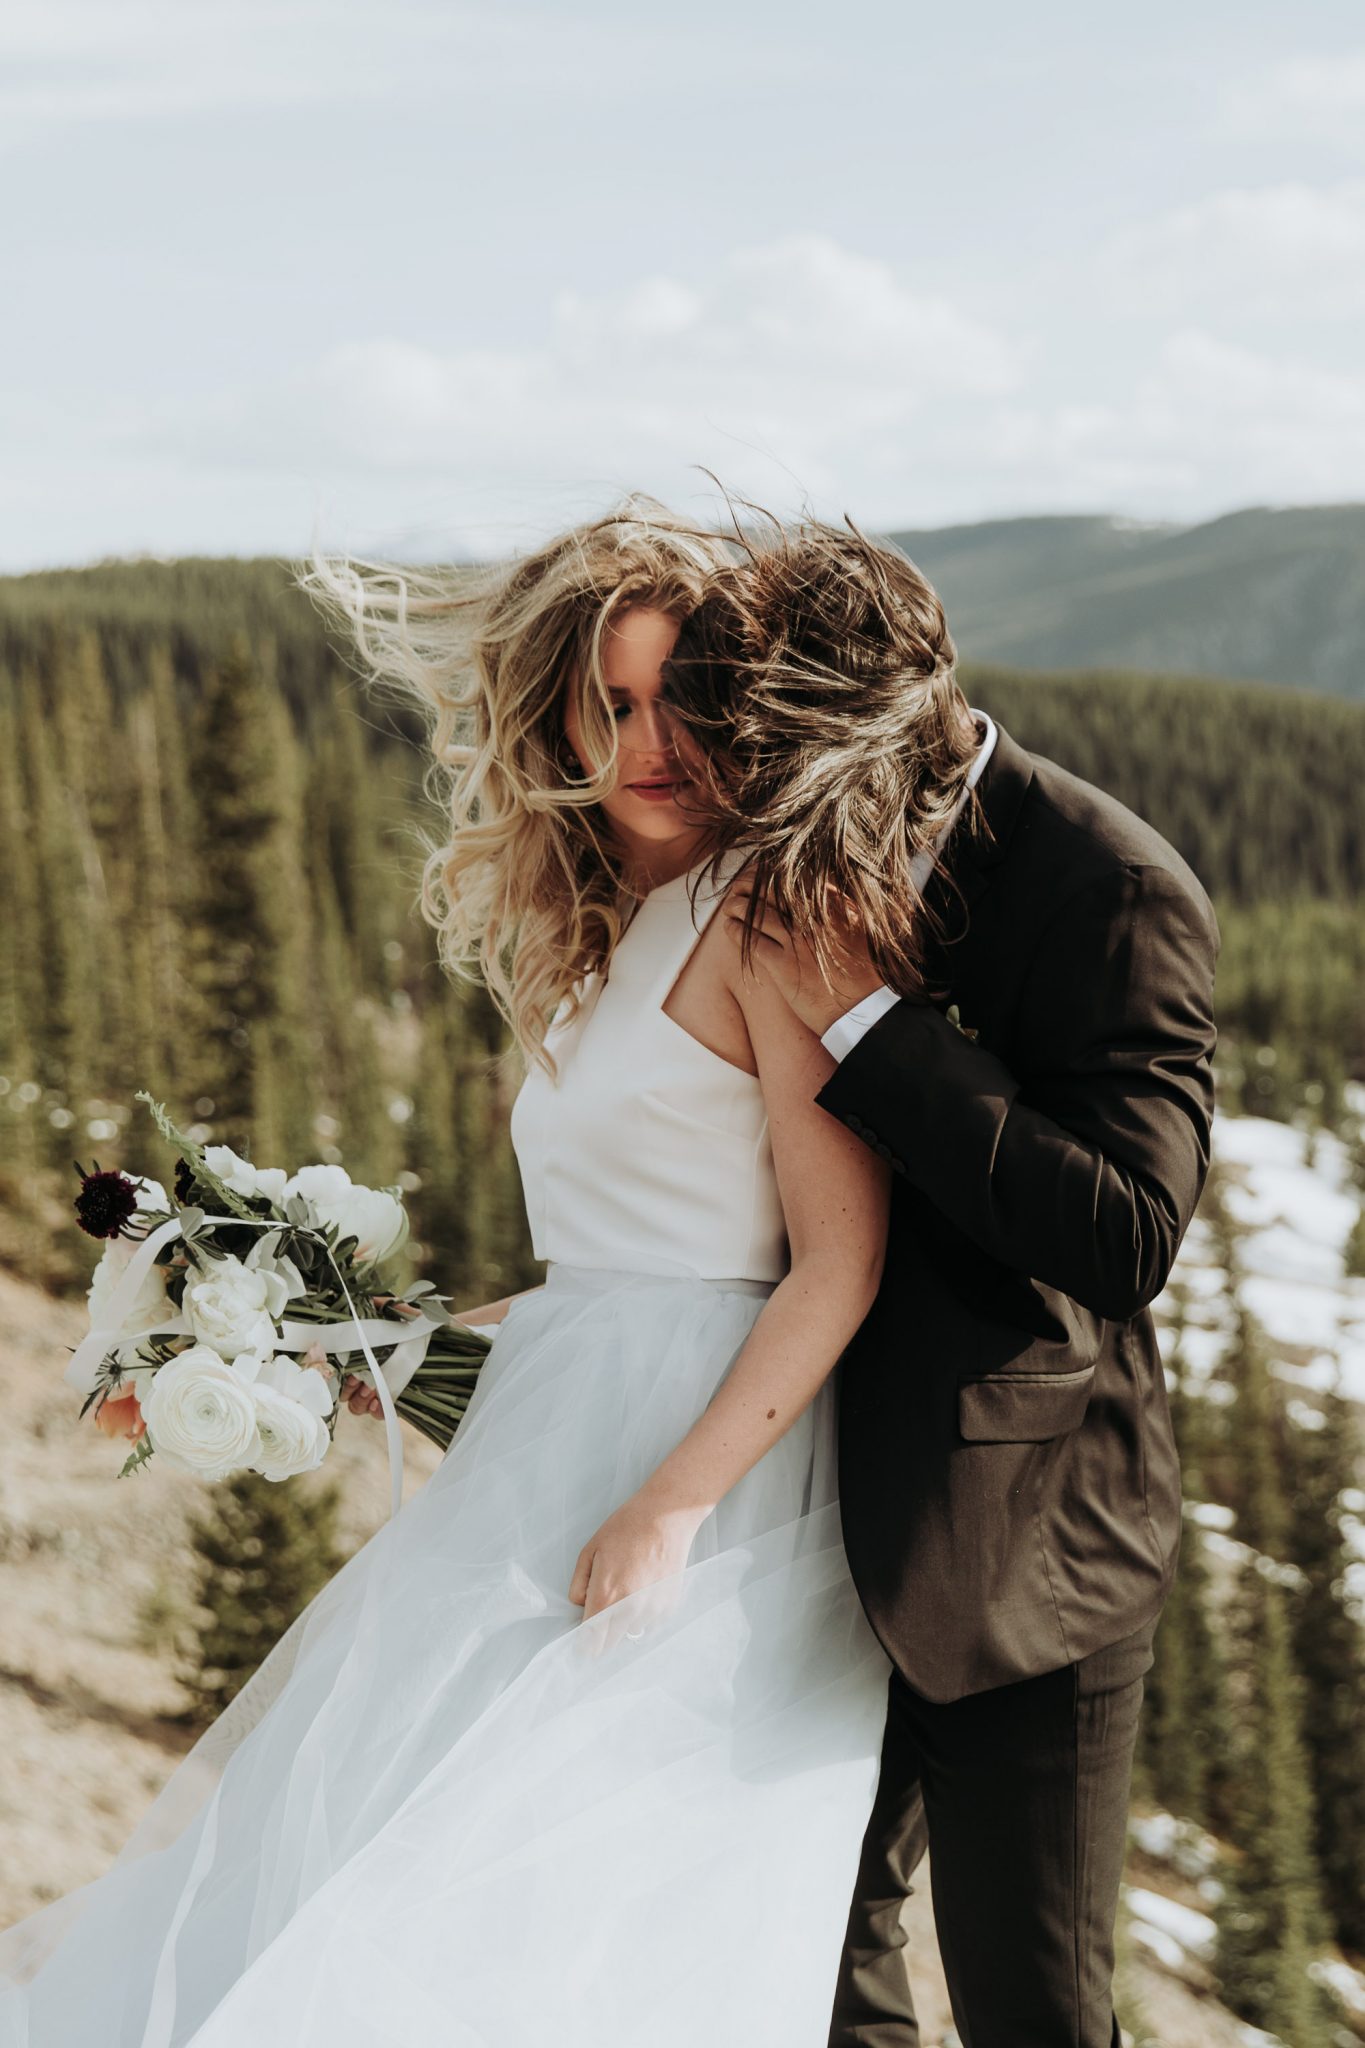 Bridal Style for a Mountainous Adventure Session featuring Contemporary Attire & Alberta Views Featured on Bronte Bridë